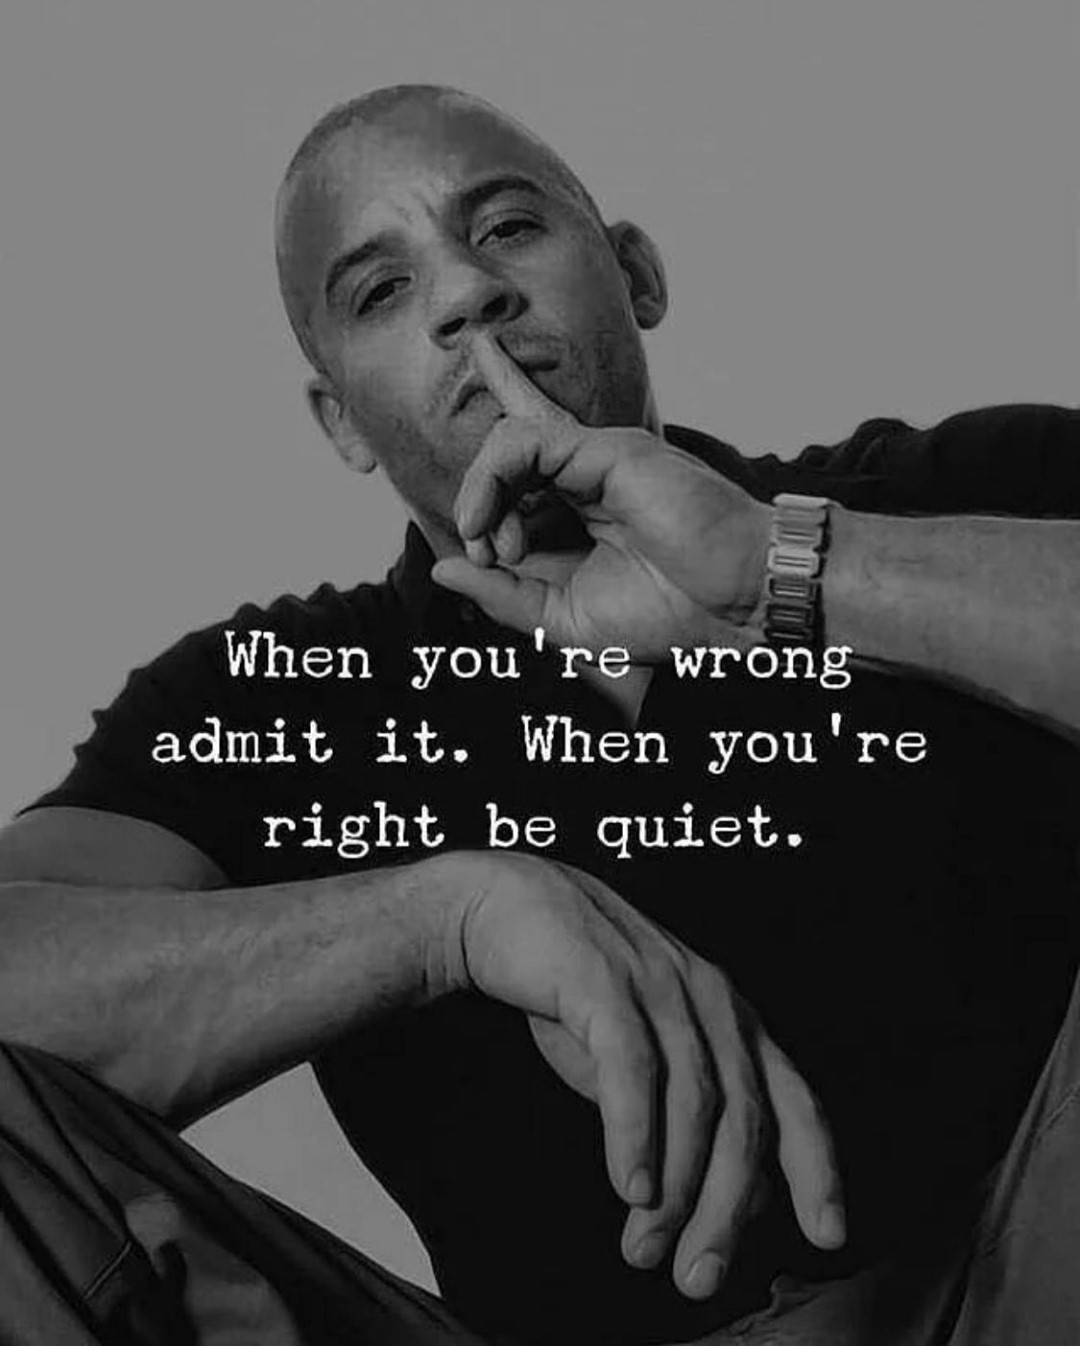 When you're wrong admit it. When you're right be quiet.